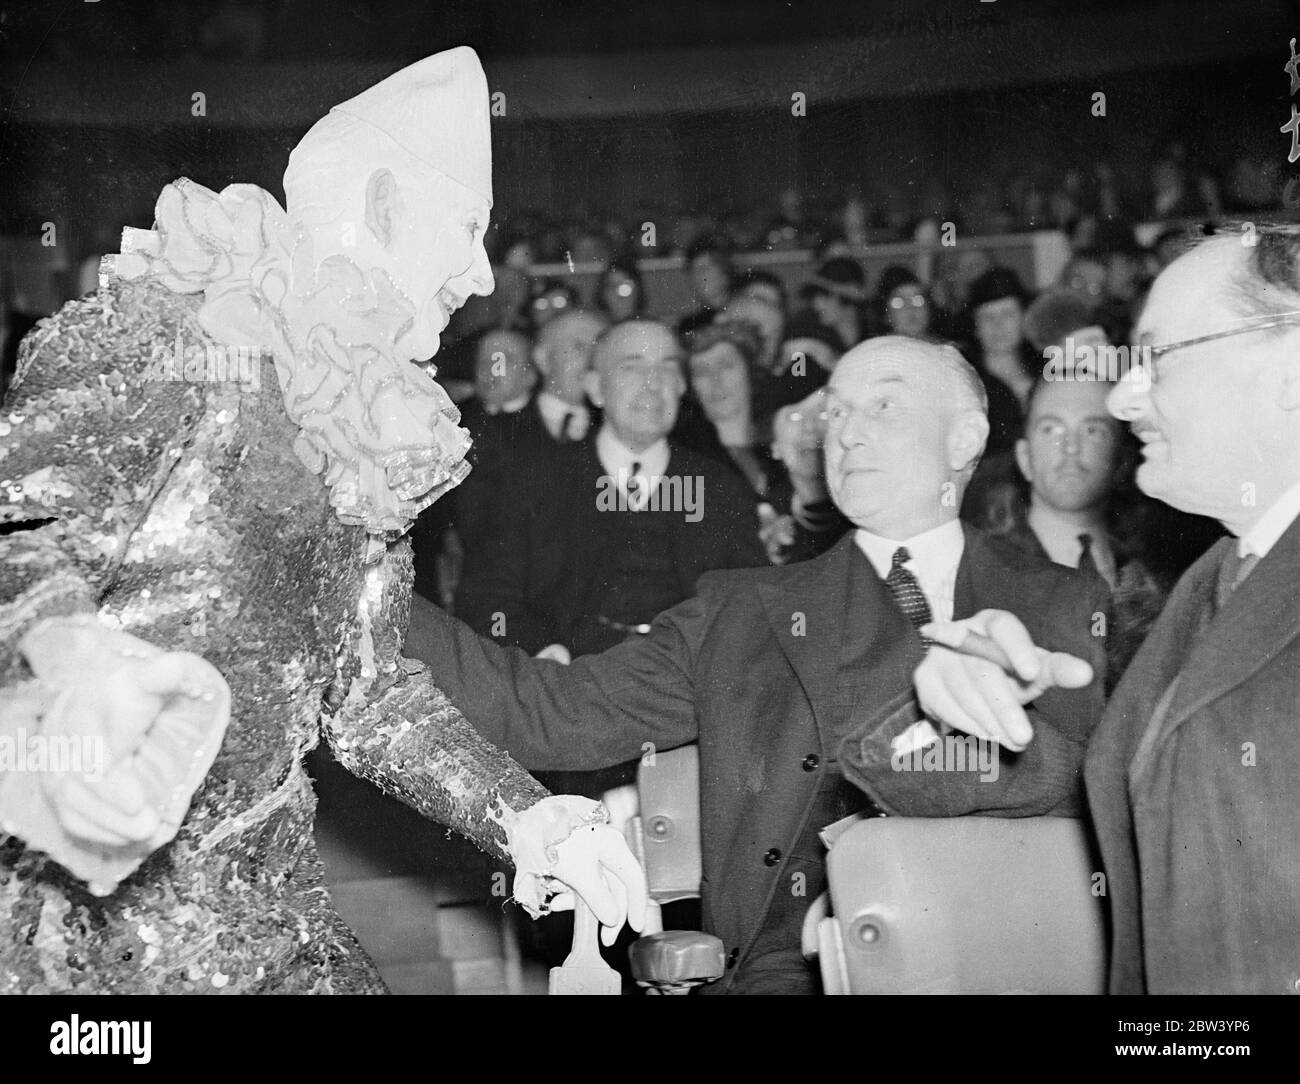 First Lord and the clown. Opening of the Olympia Circus. Cabinet Ministers and the Lord Mayor, Sir George Broadbridge, attended the opening of Bertram Mills' Christmas Circus at Olympia, London. Photo shows: Sir Samuel Hoare, first Lord of the Admiralty, chatting to a clown at the Circus. 22 December 1936 Stock Photo